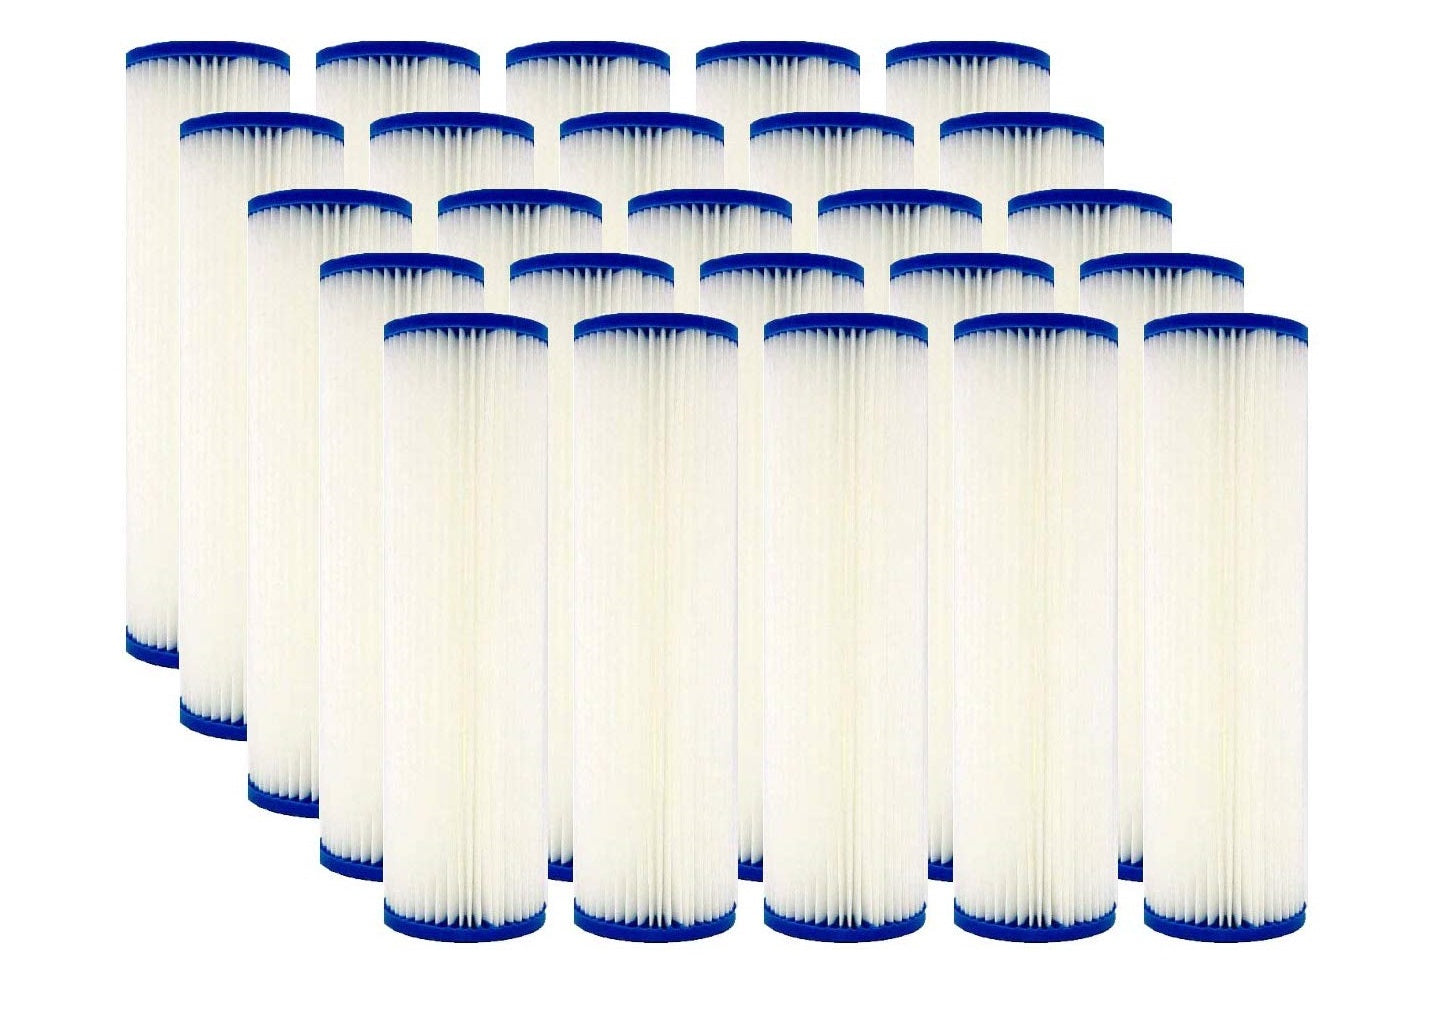 Image of ID 1190373473 1 Micron 10" x 25" Pleated Sediment Water Filter Cartridge / Universal Replacement for Any 10 inch RO Unit / Compatible with R50 801-50 WFPFC3002 WB-50W SPC-25-1050 WHKF-WHPL by IPW Industries Inc